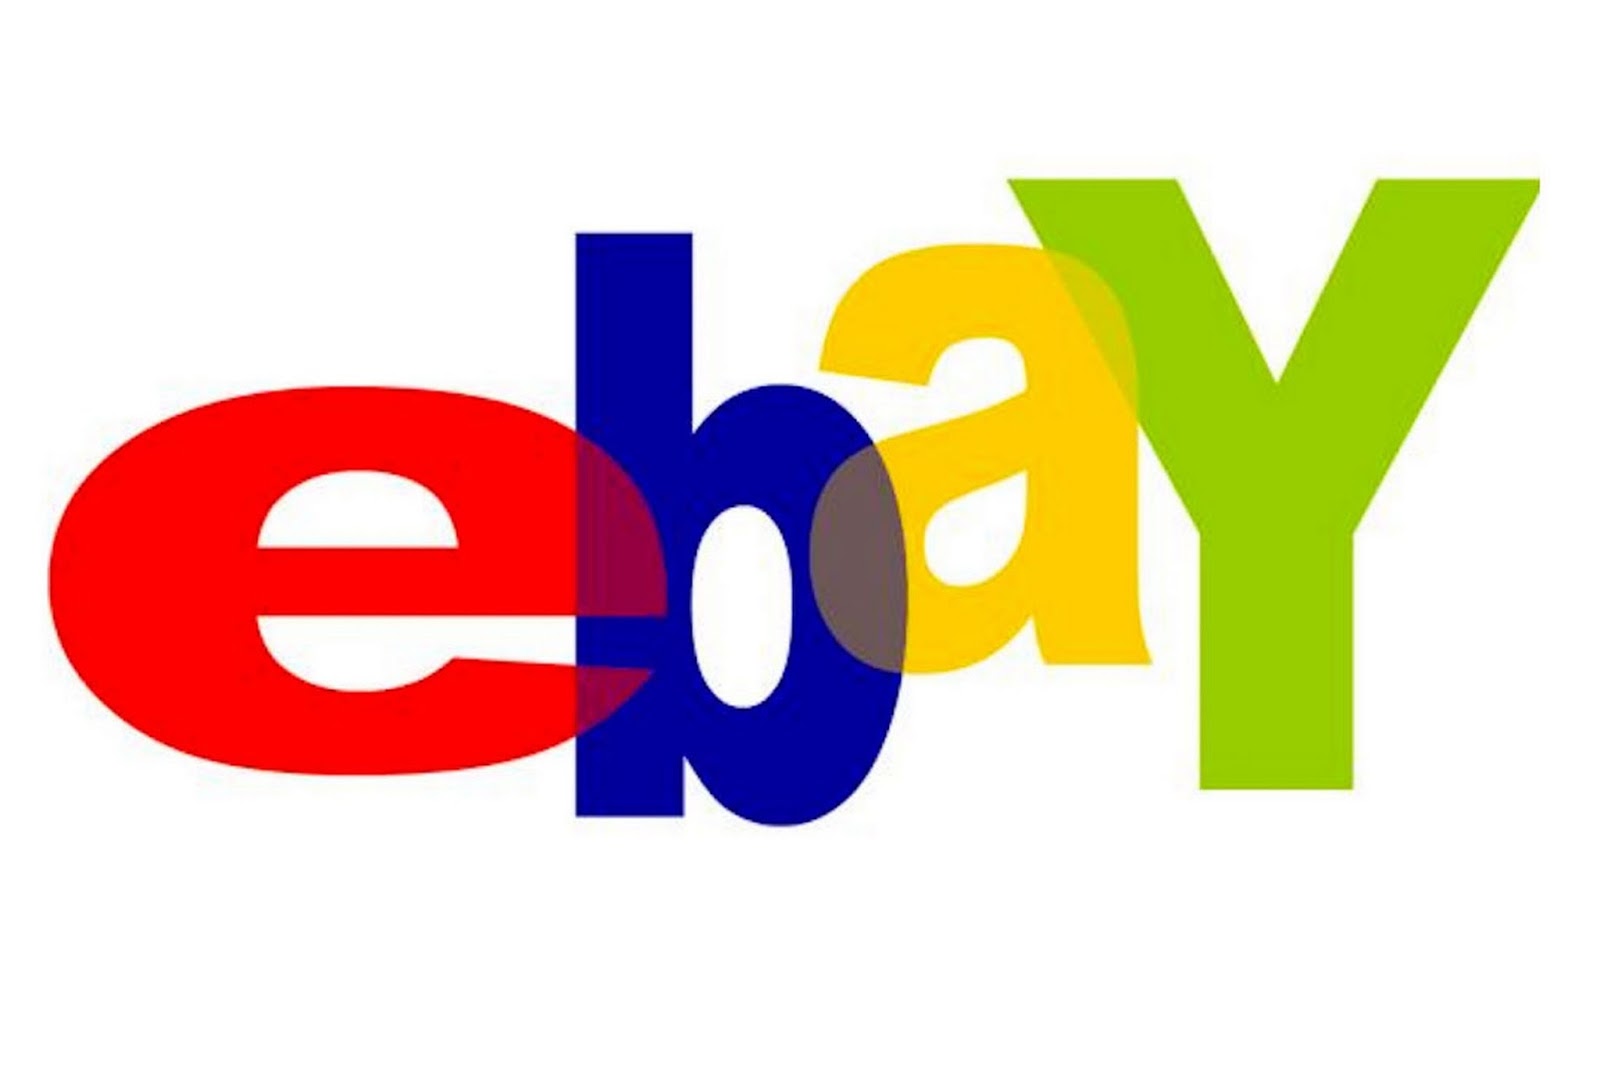 How to import and sell on eBay